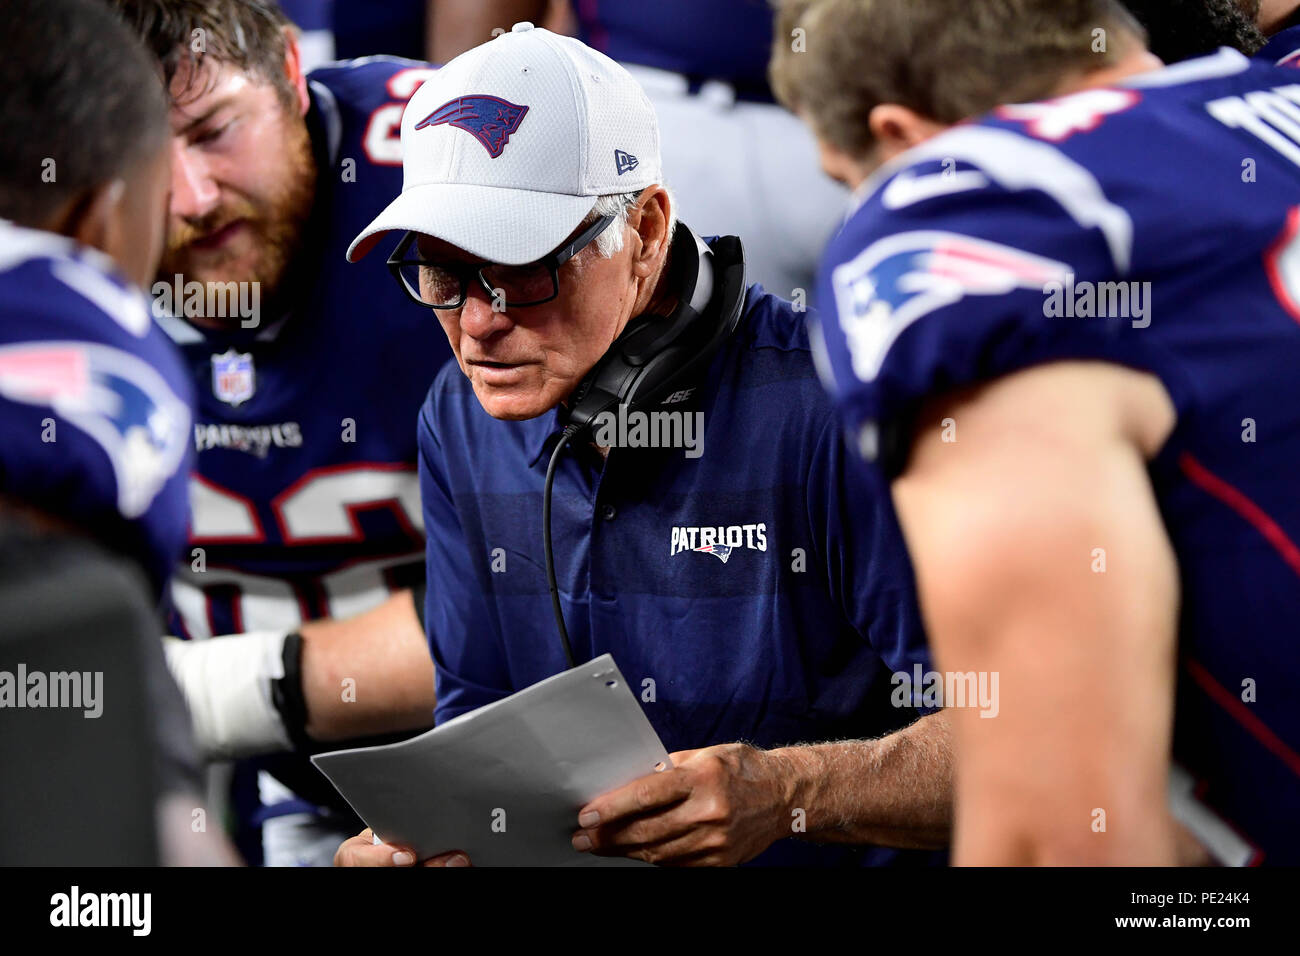 August 9, 2018: New England Patriots offensive line coach Dante Scarnecchia talks to the offensive line during the NFL pre-season football game between the Washington Redskins and the New England Patriots at Gillette Stadium, in Foxborough, Massachusetts.The Patriots defeat the Redskins 26-17. Eric Canha/CSM Credit: Cal Sport Media/Alamy Live News Stock Photo